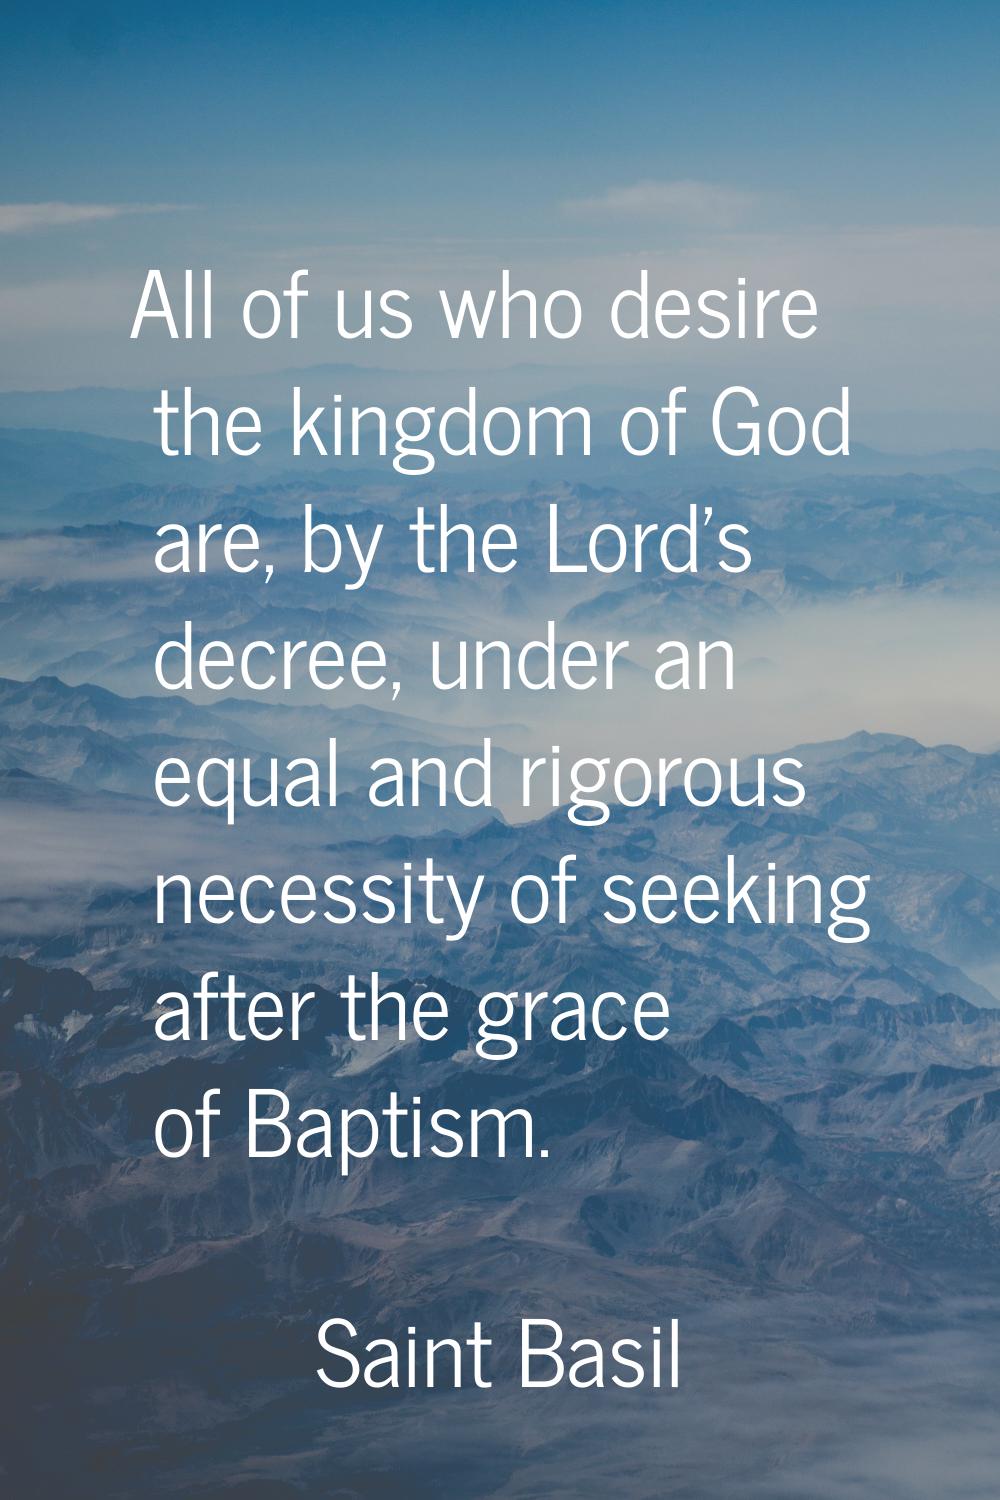 All of us who desire the kingdom of God are, by the Lord's decree, under an equal and rigorous nece